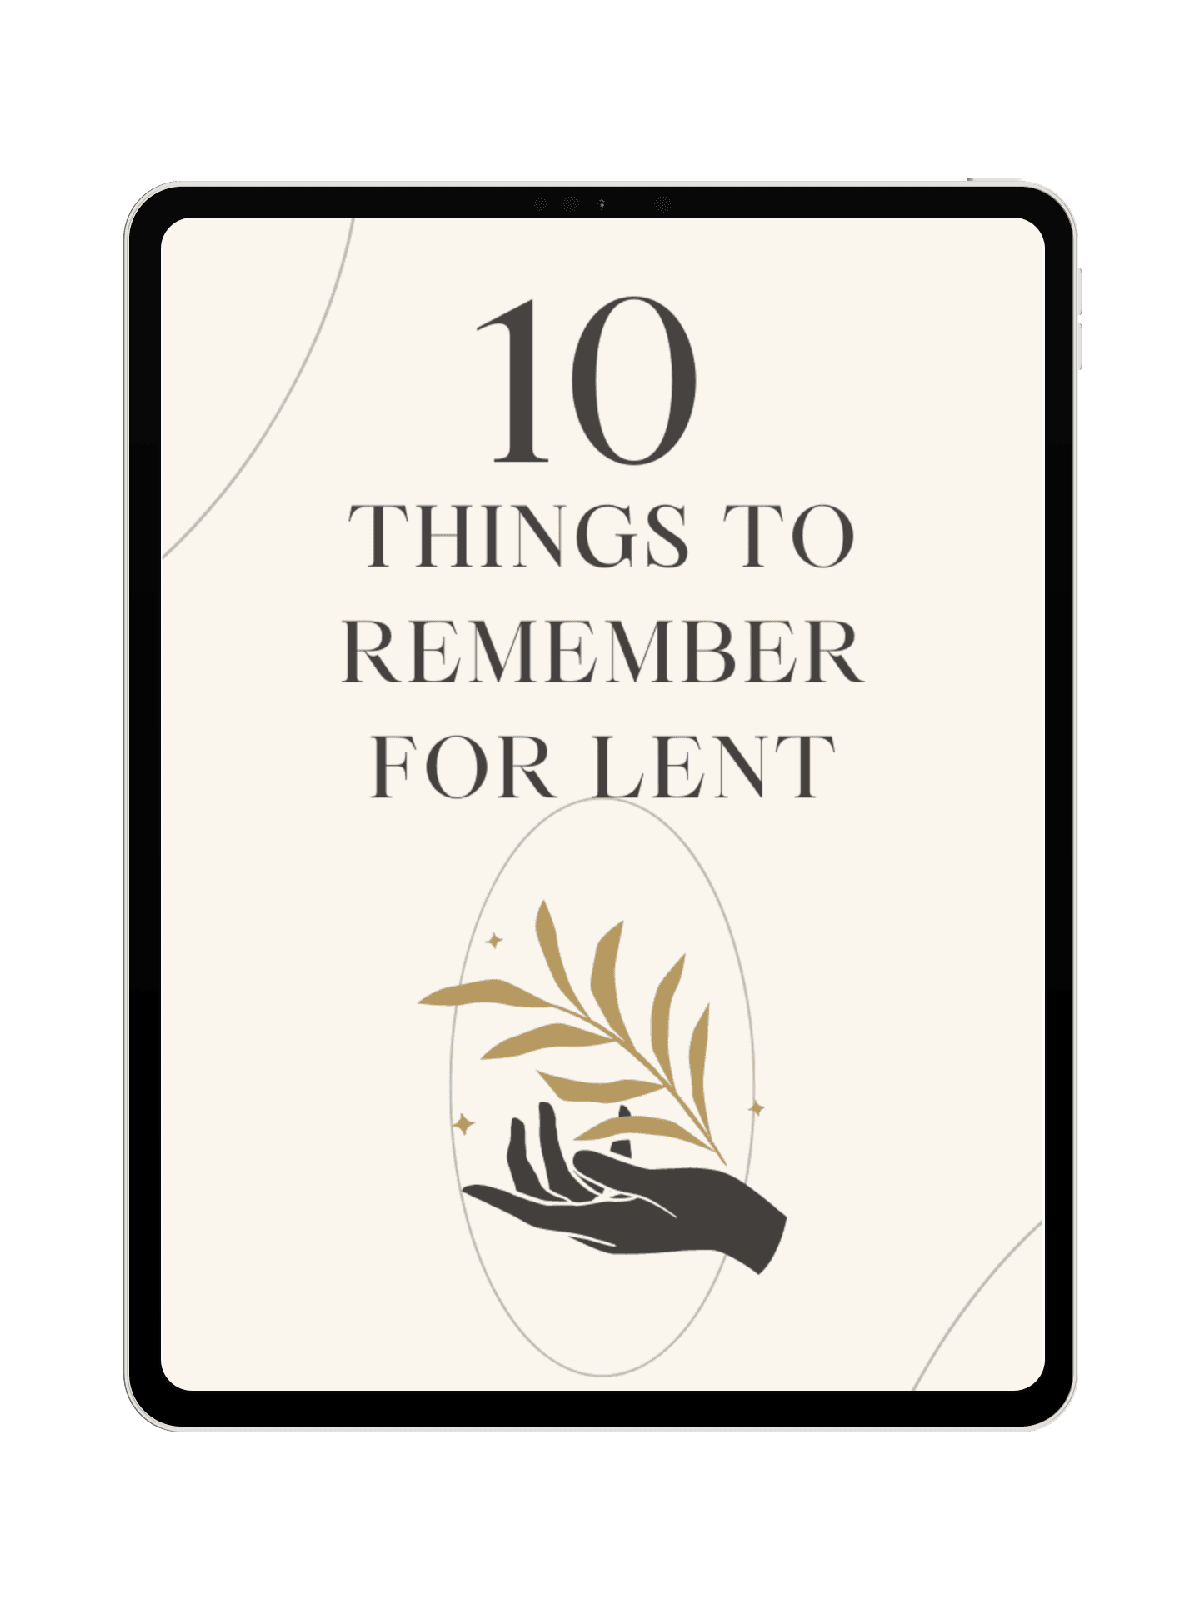 10 Things to Remember For Lent daily devotionals, morning prayer, scriptures, bible study